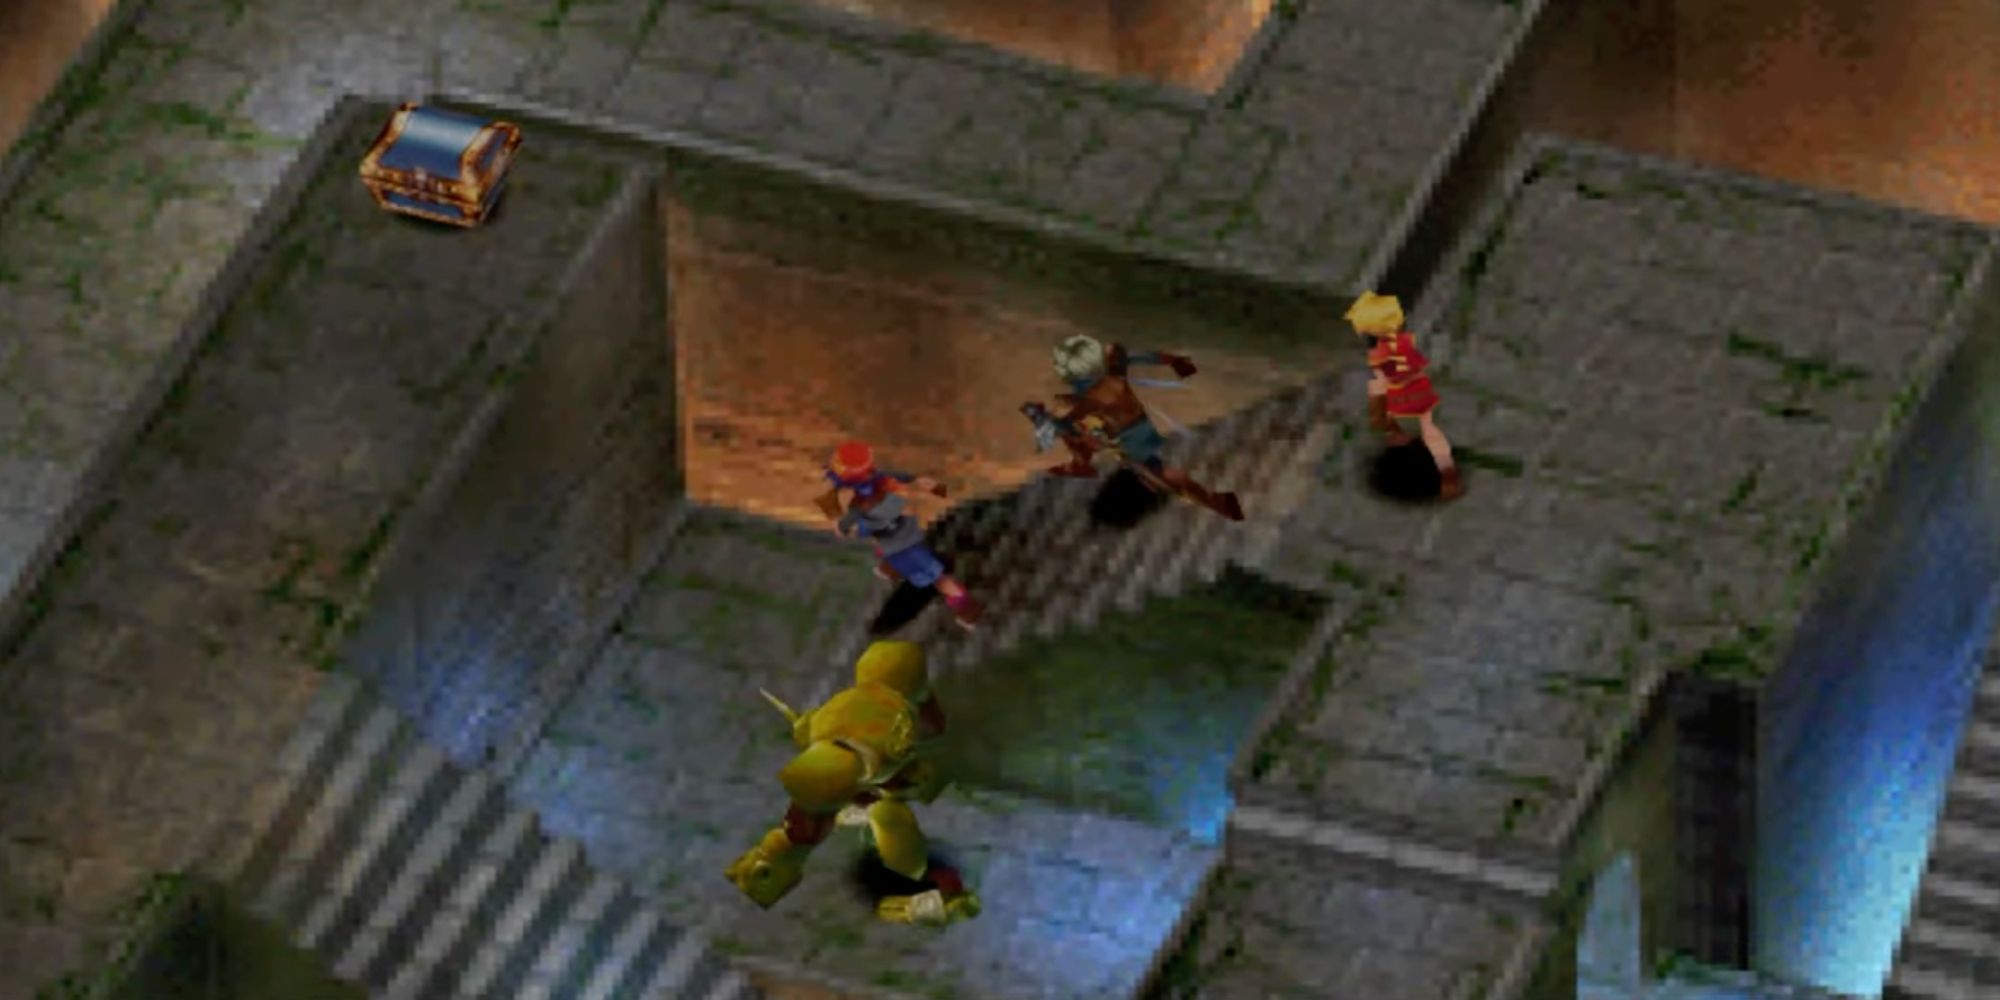 A screenshot of Chrono Cross, showing Serge and the party exploring Fort Dragonia while a Cybot enemy lies in wait